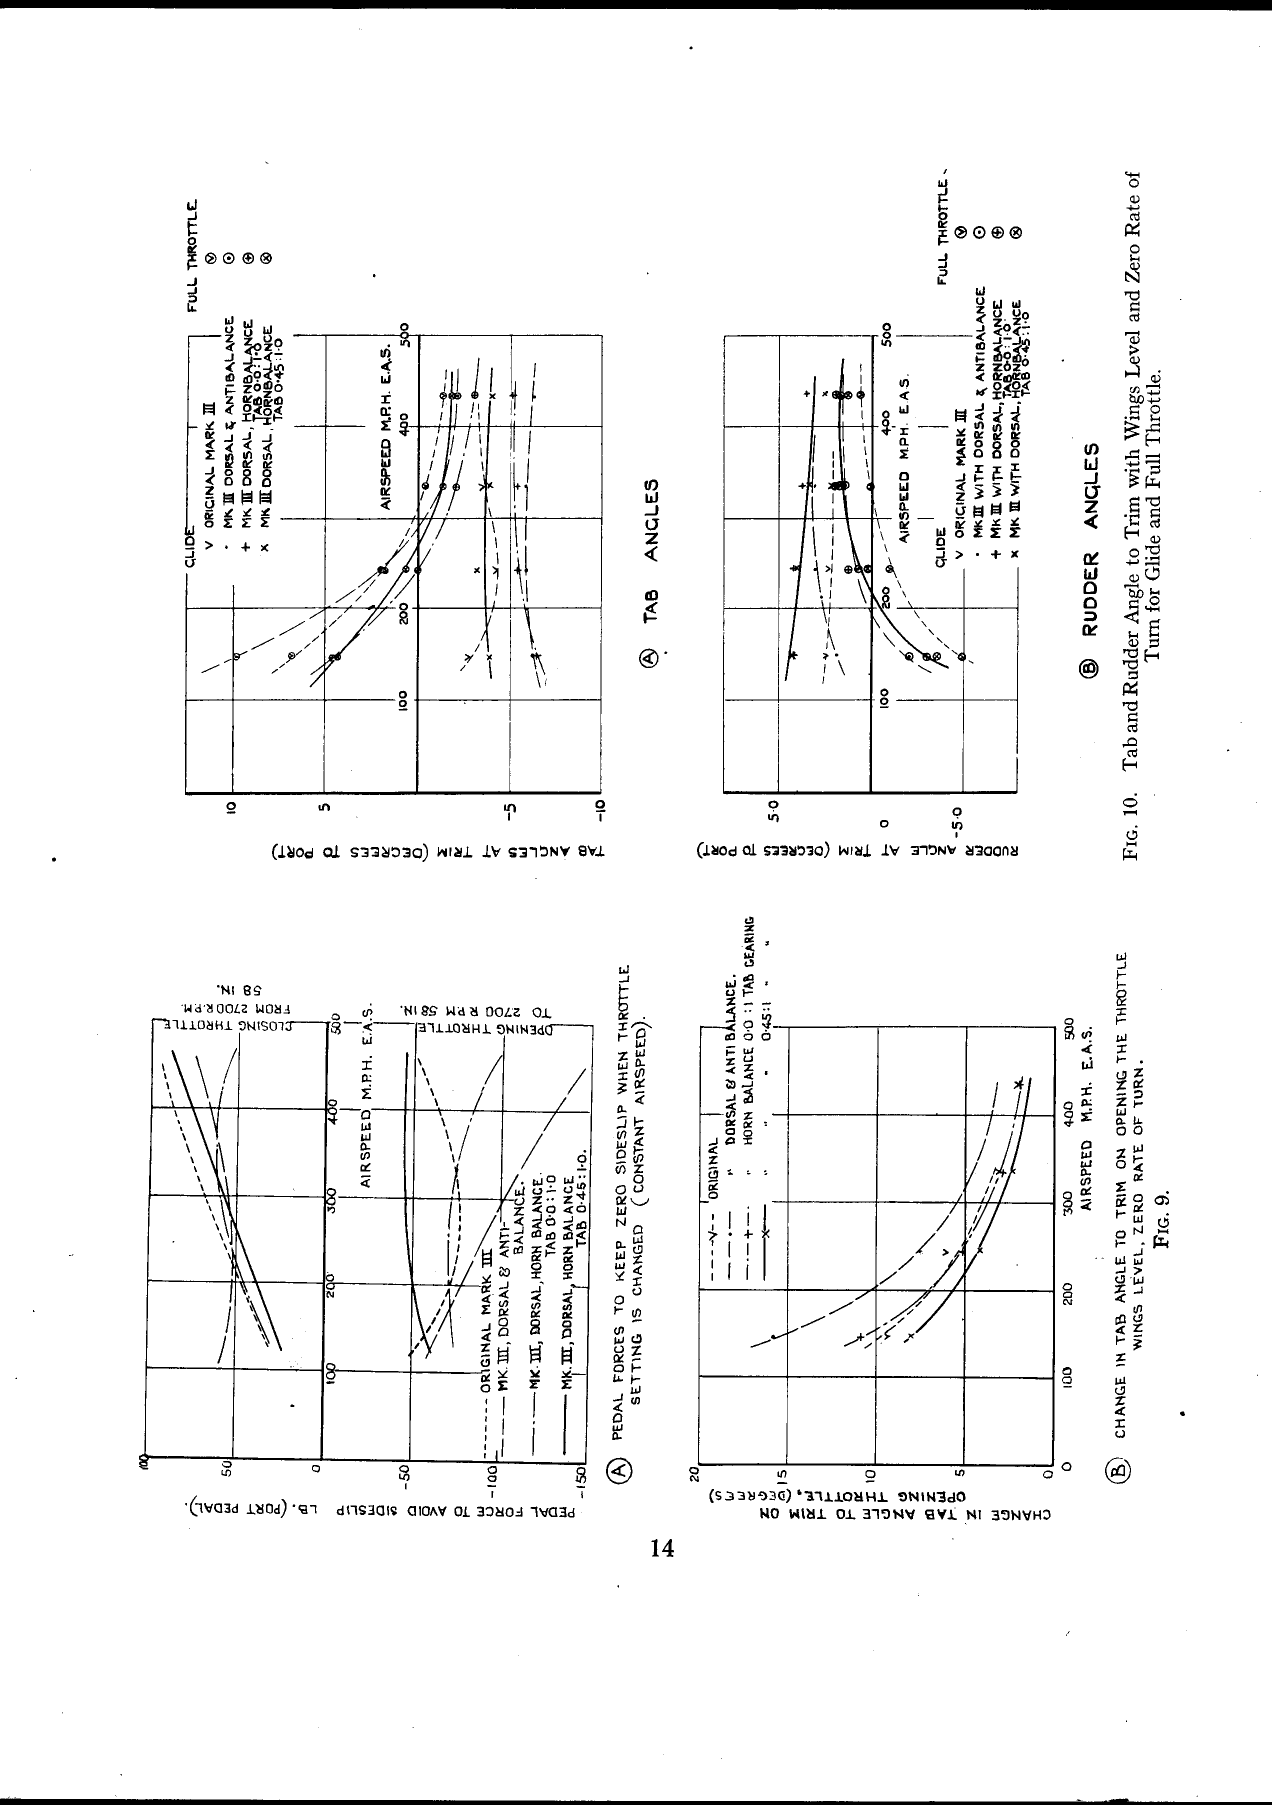 Sample page 14 from AirCorps Library document: Flight Measurements - Directional Stability & Trim - P-51